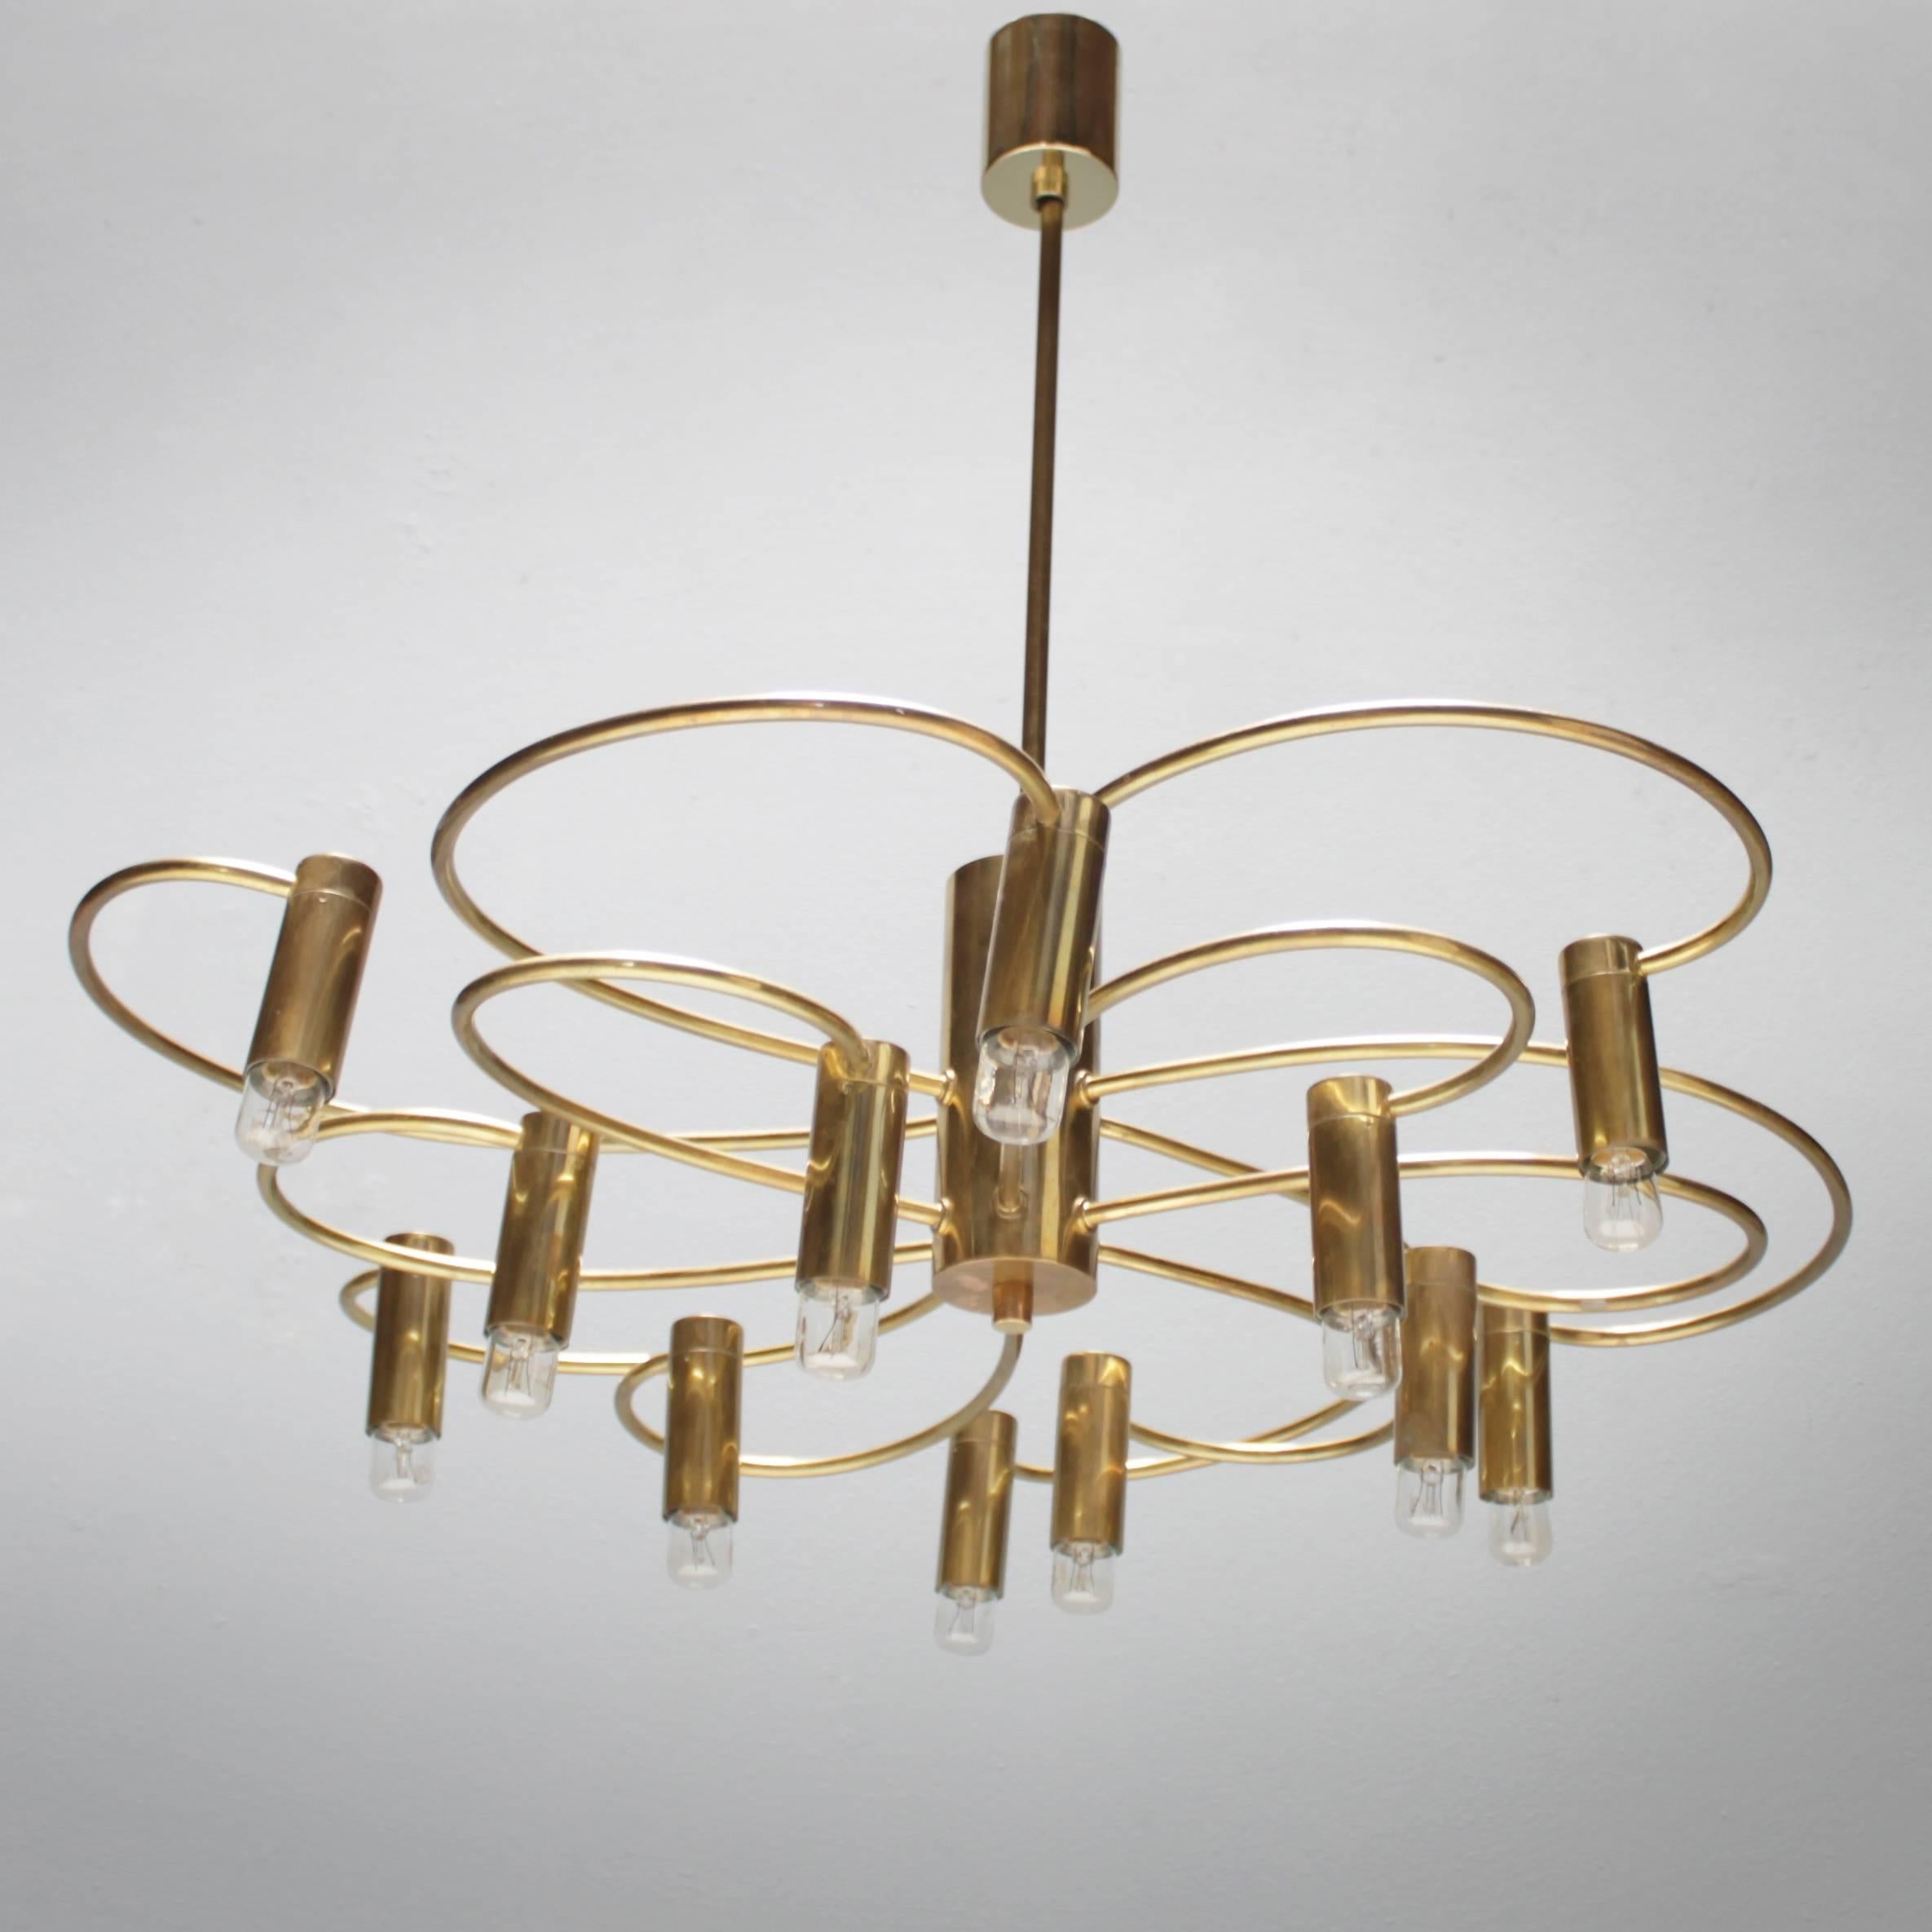 Twelve-lights brass chandelier by Gaetano Sciolari for S.A. Boulanger Belgium. Dimensions: Height from ceiling till drop 23.6 inches (60 cm), width 22.0 in. (56 cm).